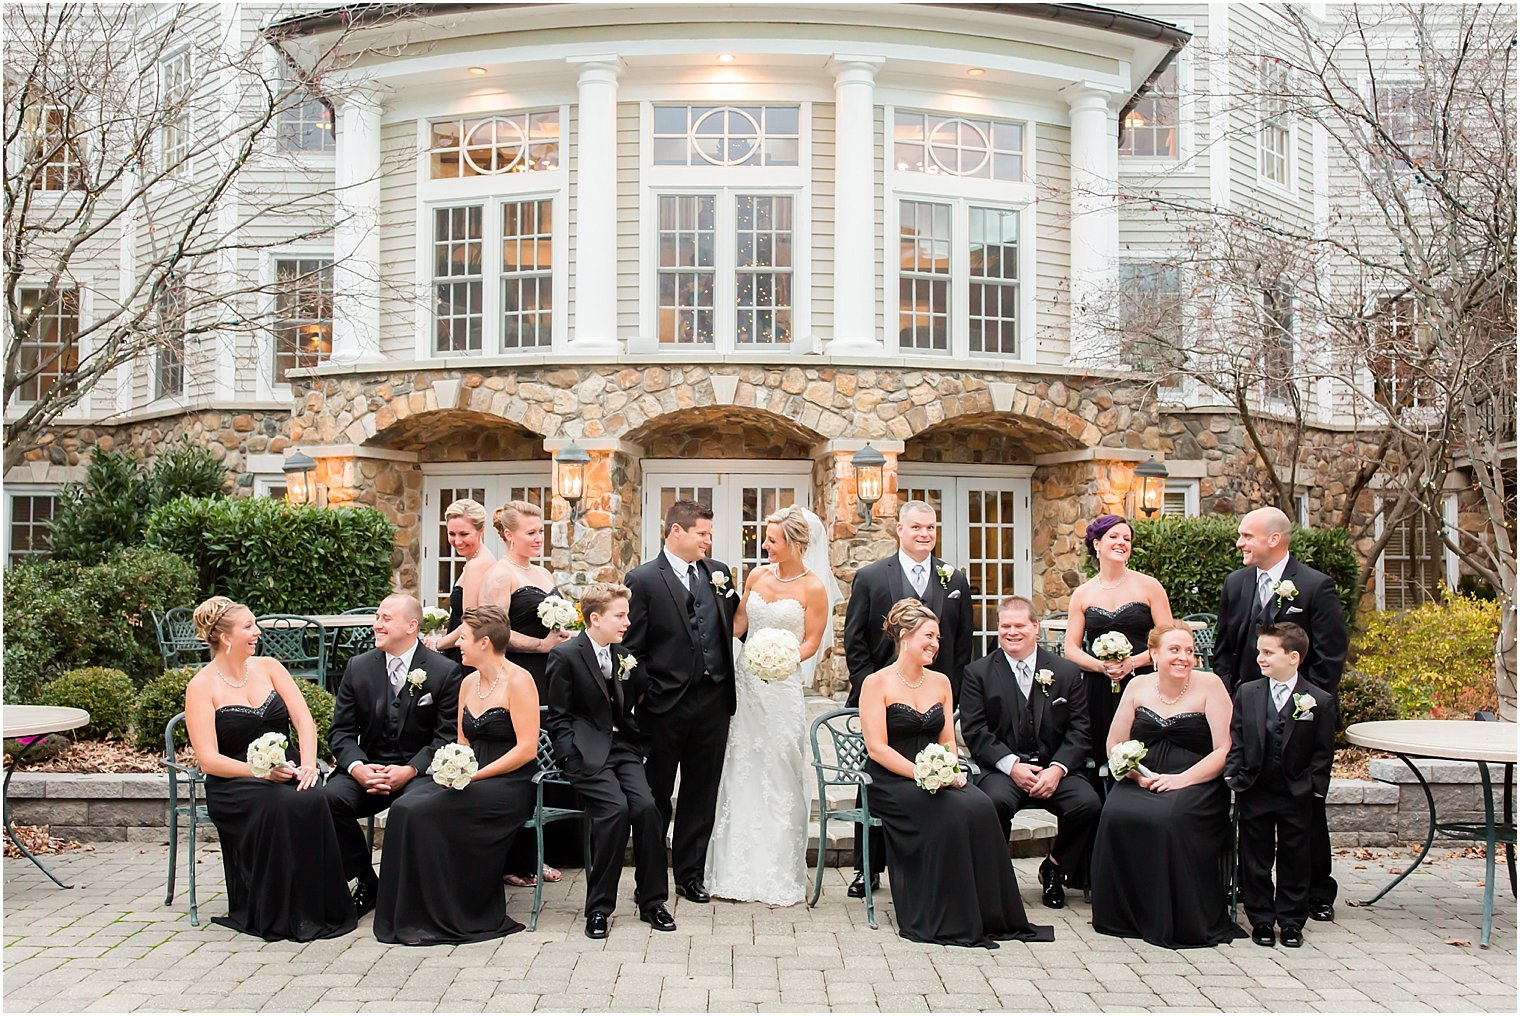 Formal bridal party photo at the Olde Mill Inn | Photo by Idalia Photography